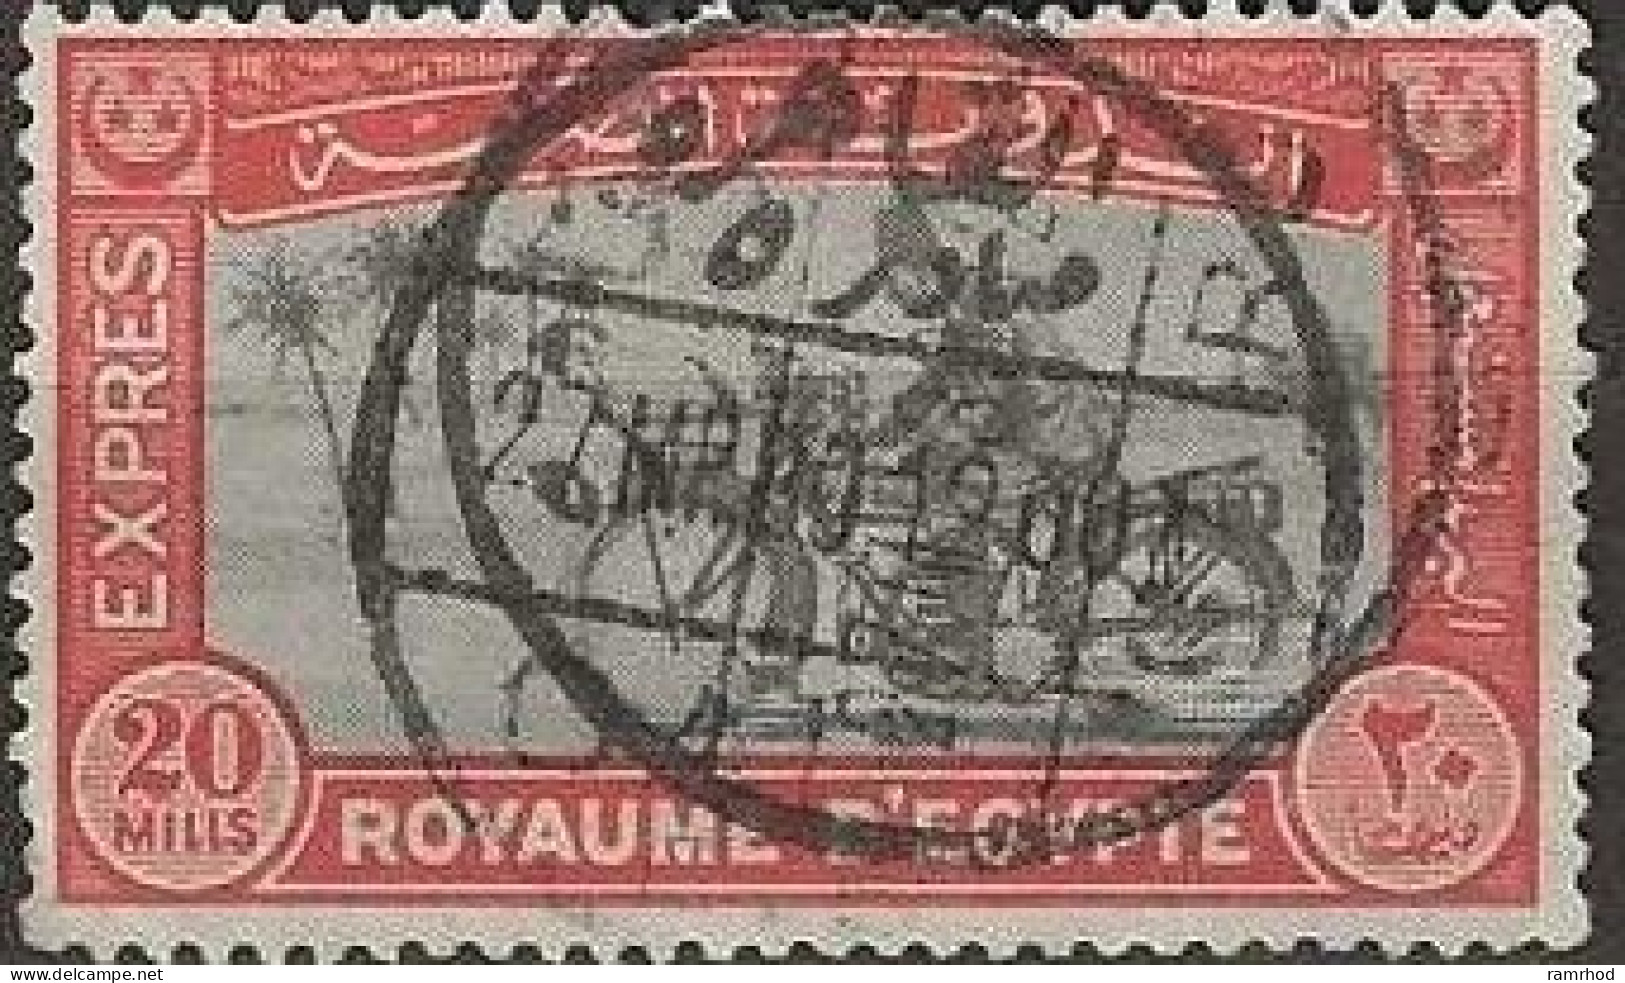 EGYPT1926 Express Letter Stamp - Postman On Motorcycle - 10m - Refugee Mother And Child, And Map FU - Service